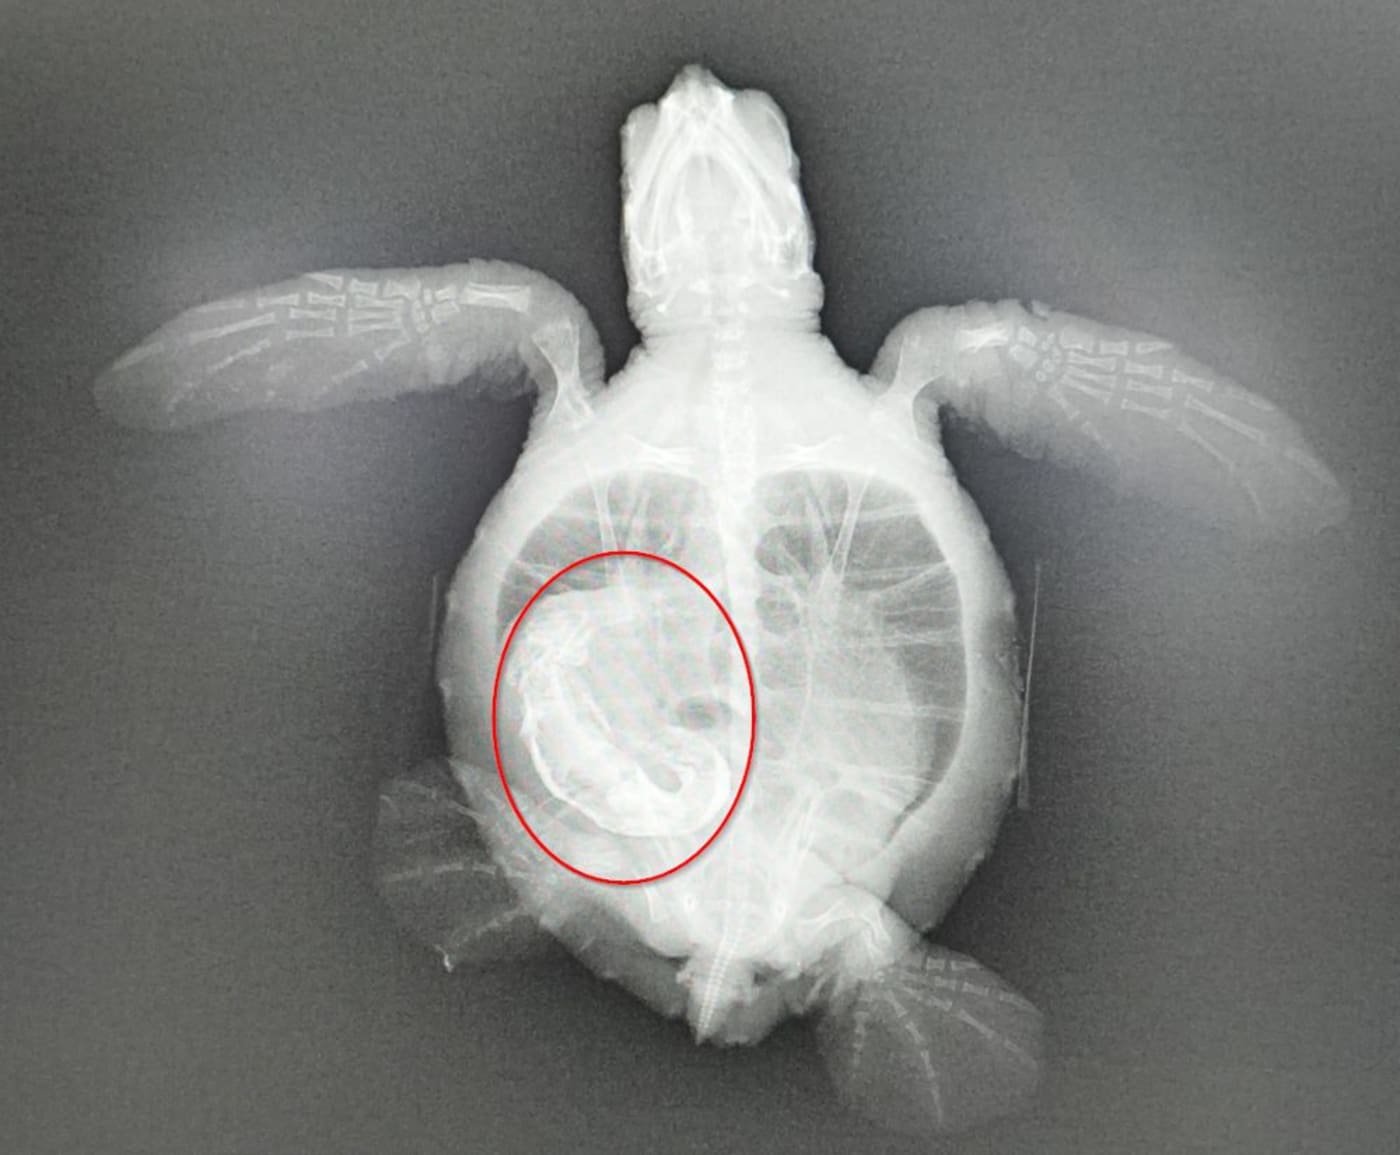 An x-ray of Pretzel showed a substantial blockage in the colon